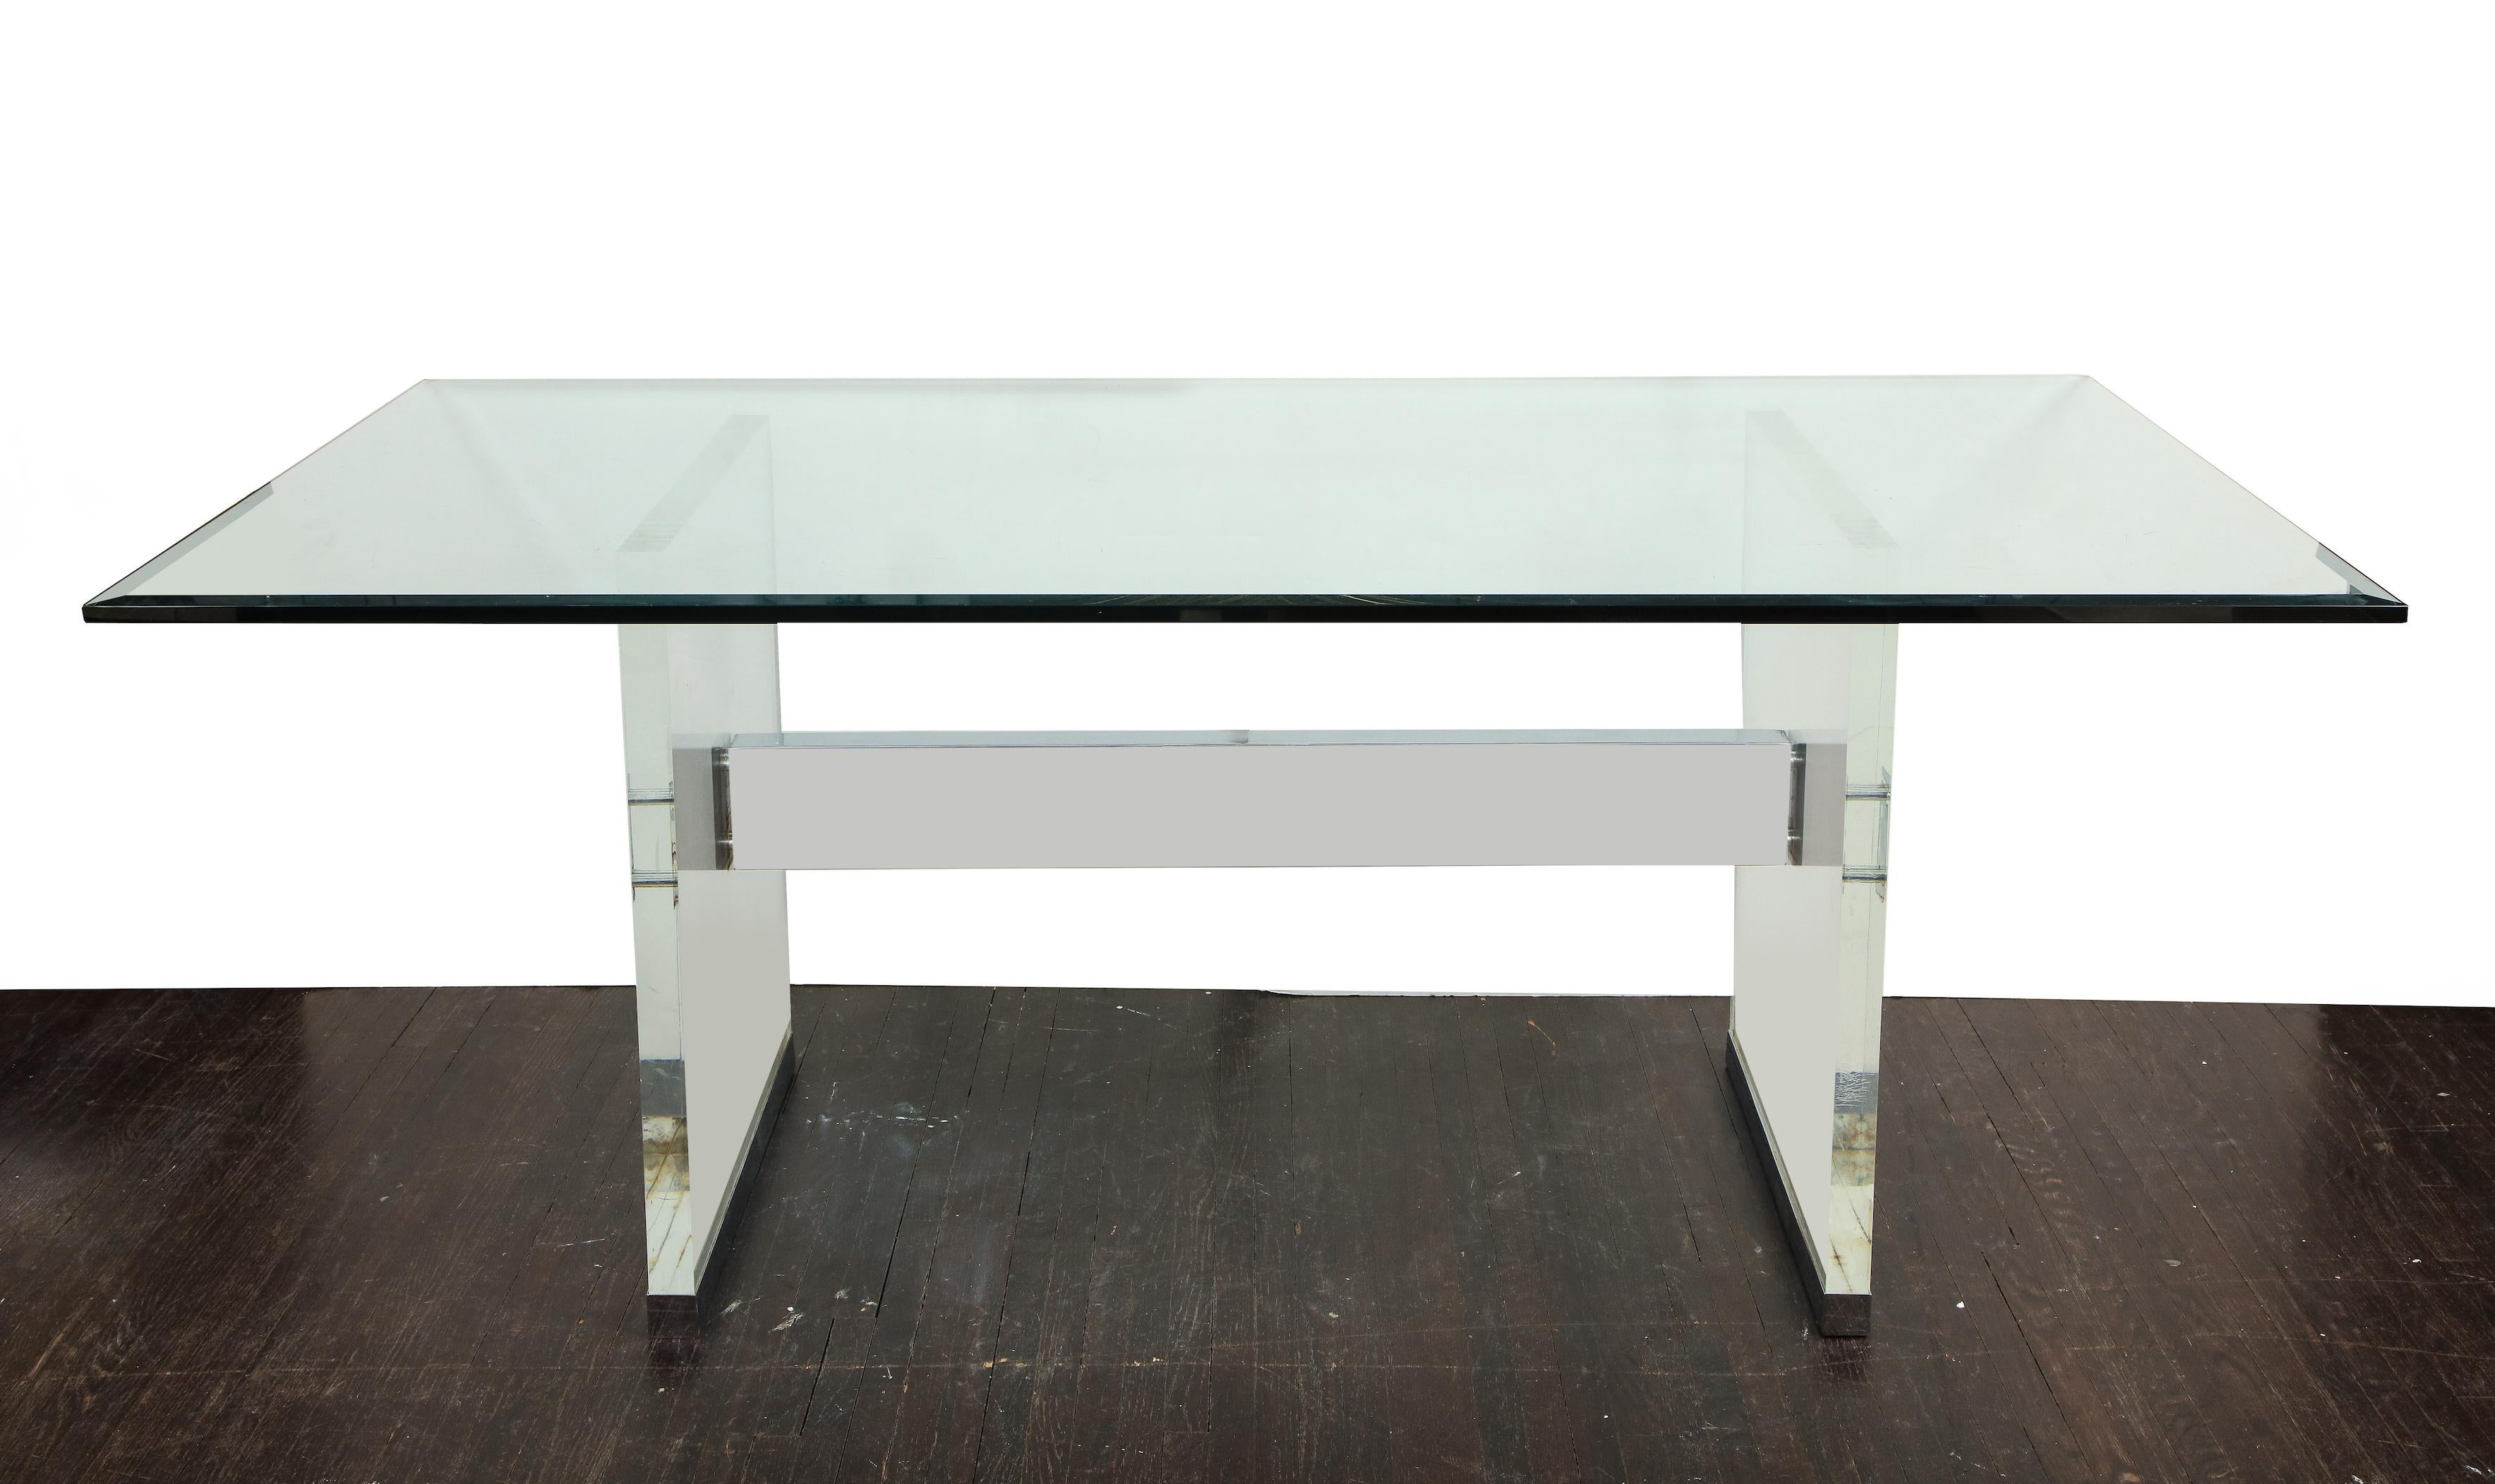 Original Charles Hollis Jones dining table with Lucite legs. A refined modern dining table designed by Charles Hollis Jones in 1970s. The table consists of thick Lucite legs, a polished nickel brace and beveled glass top.